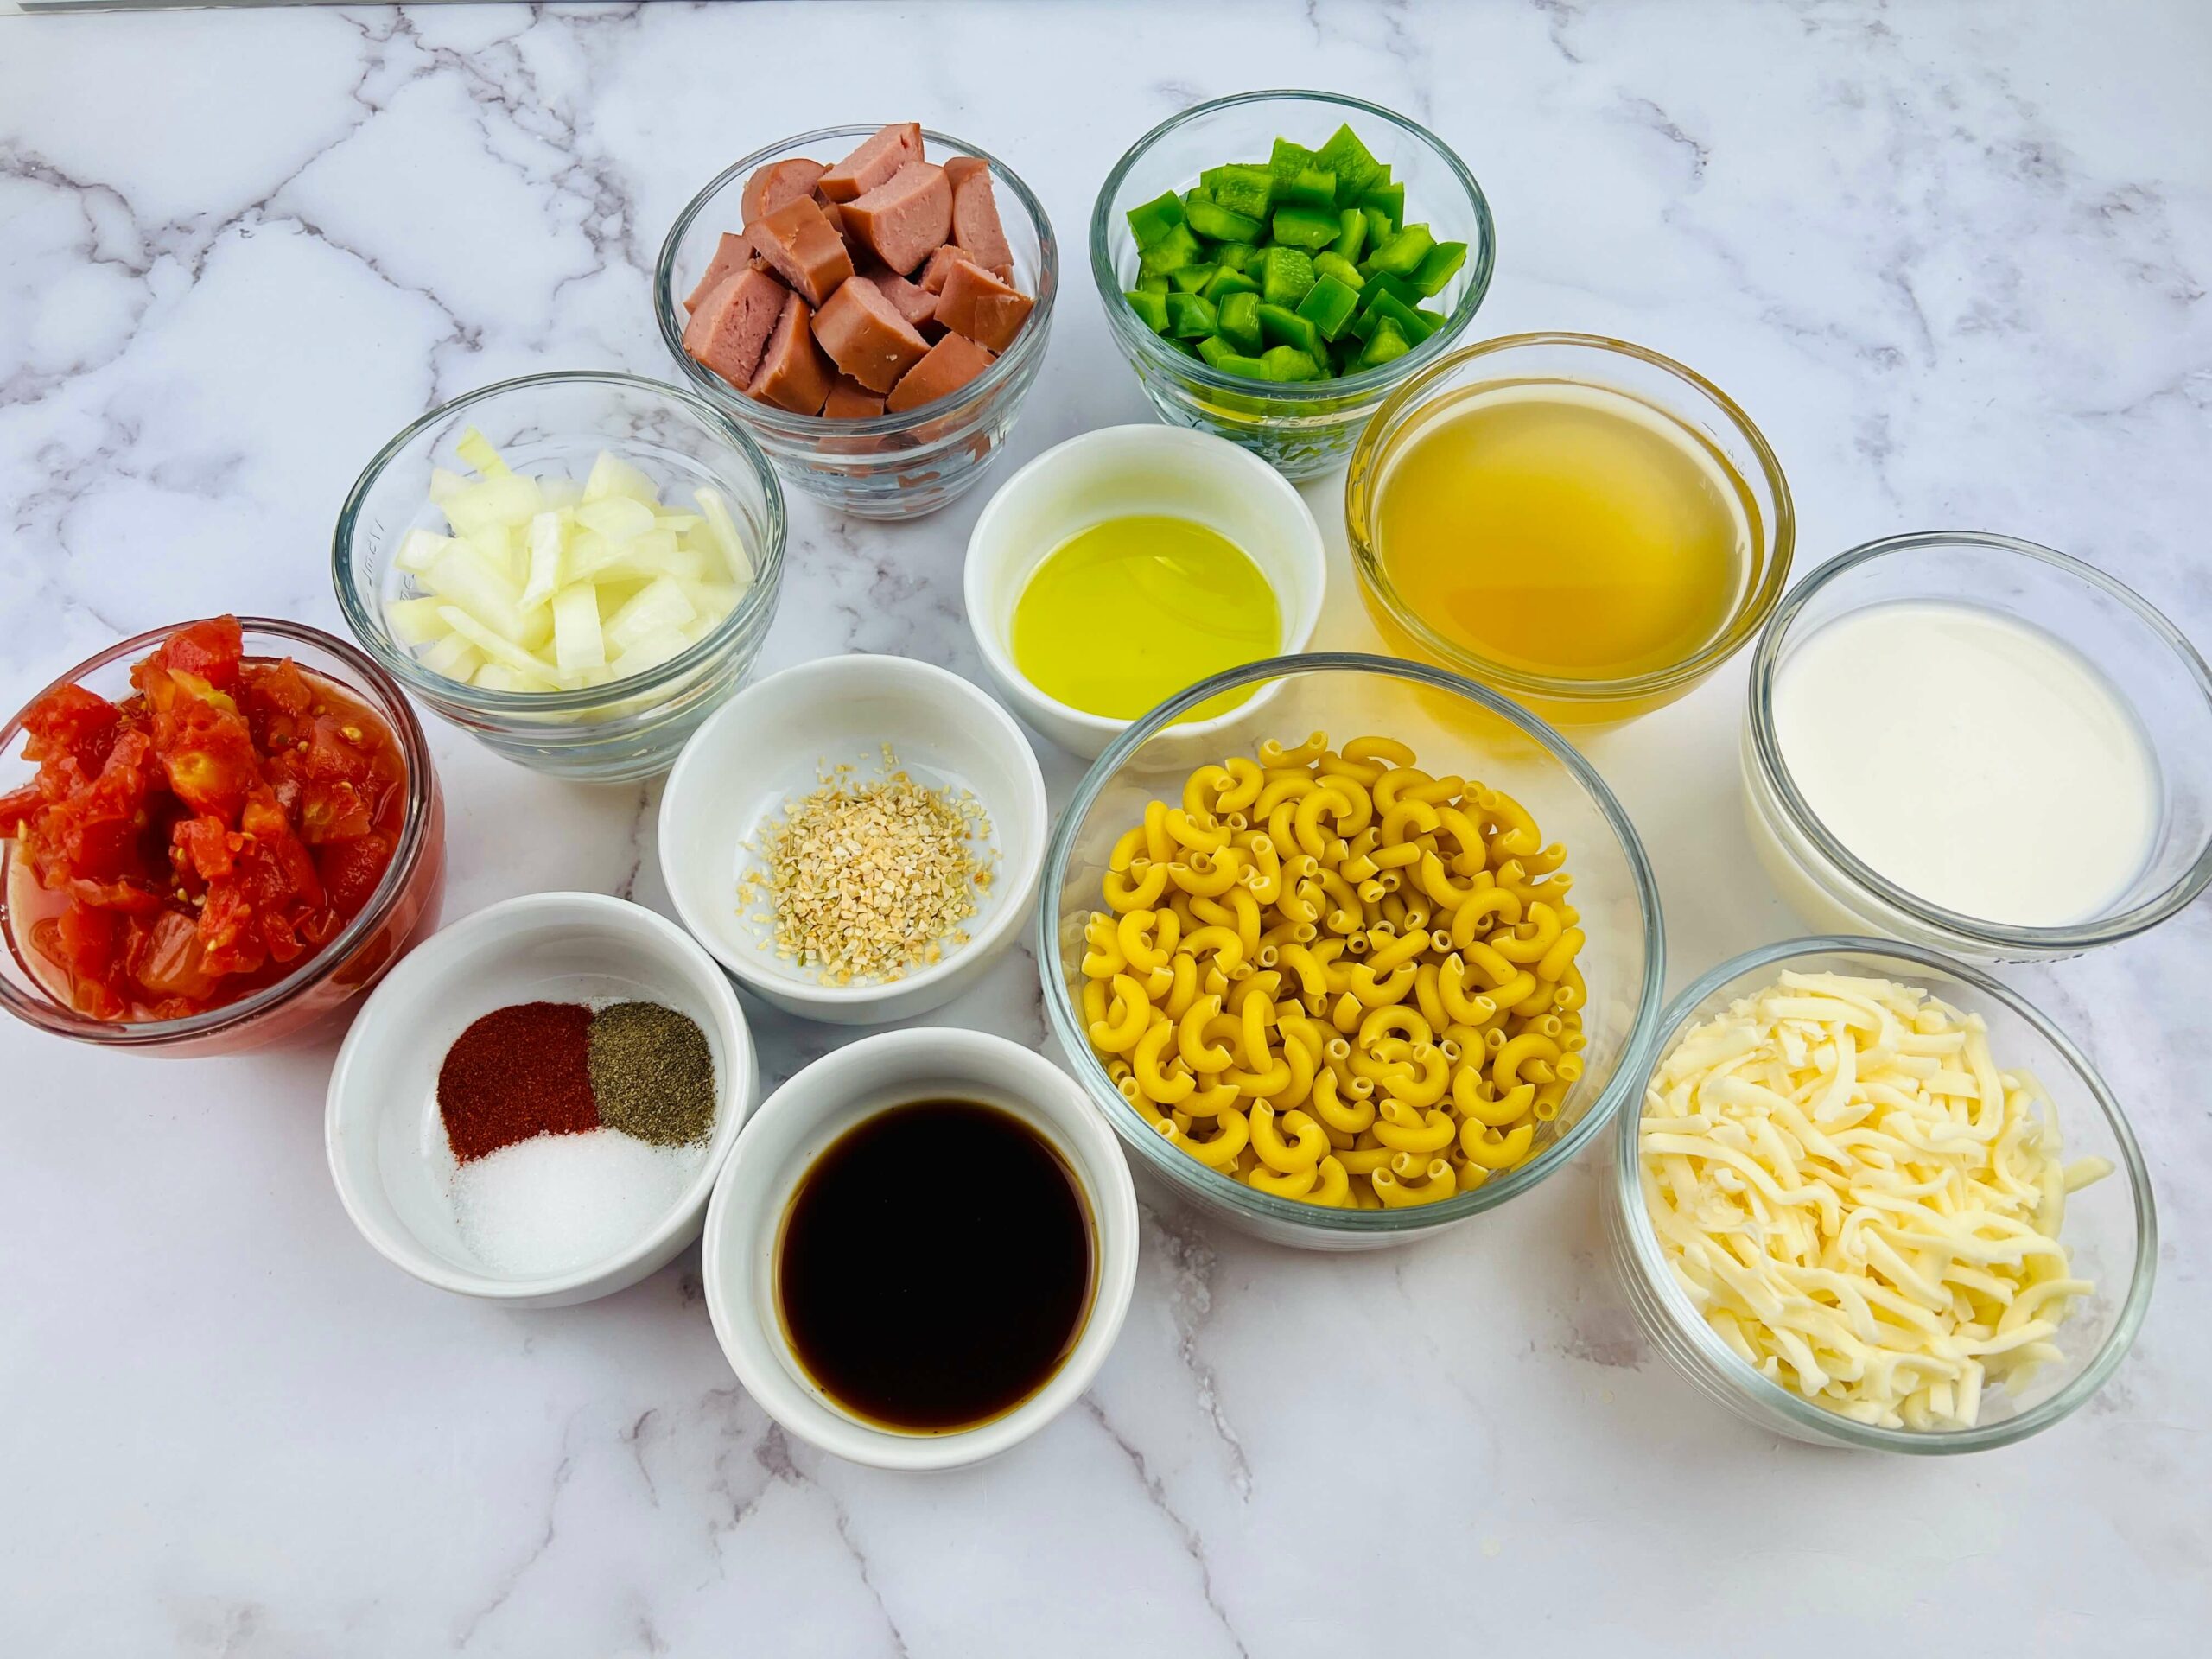 On the marble table, there are ingredients  of noodles, sausage, tomatoes and seasoning.